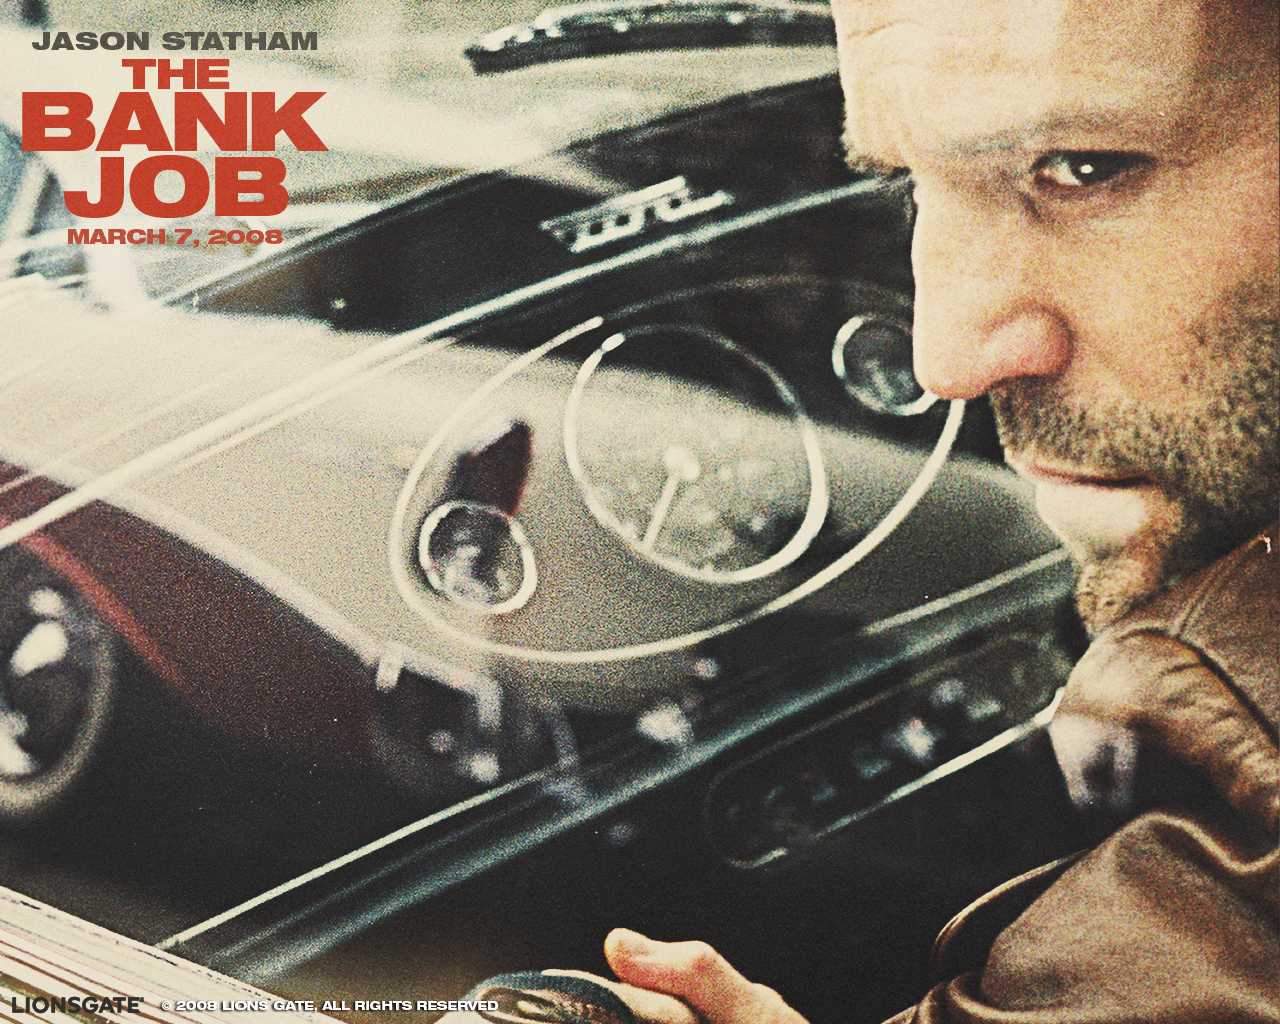 Download full size The Bank Job wallpaper / Movies / 1280x1024